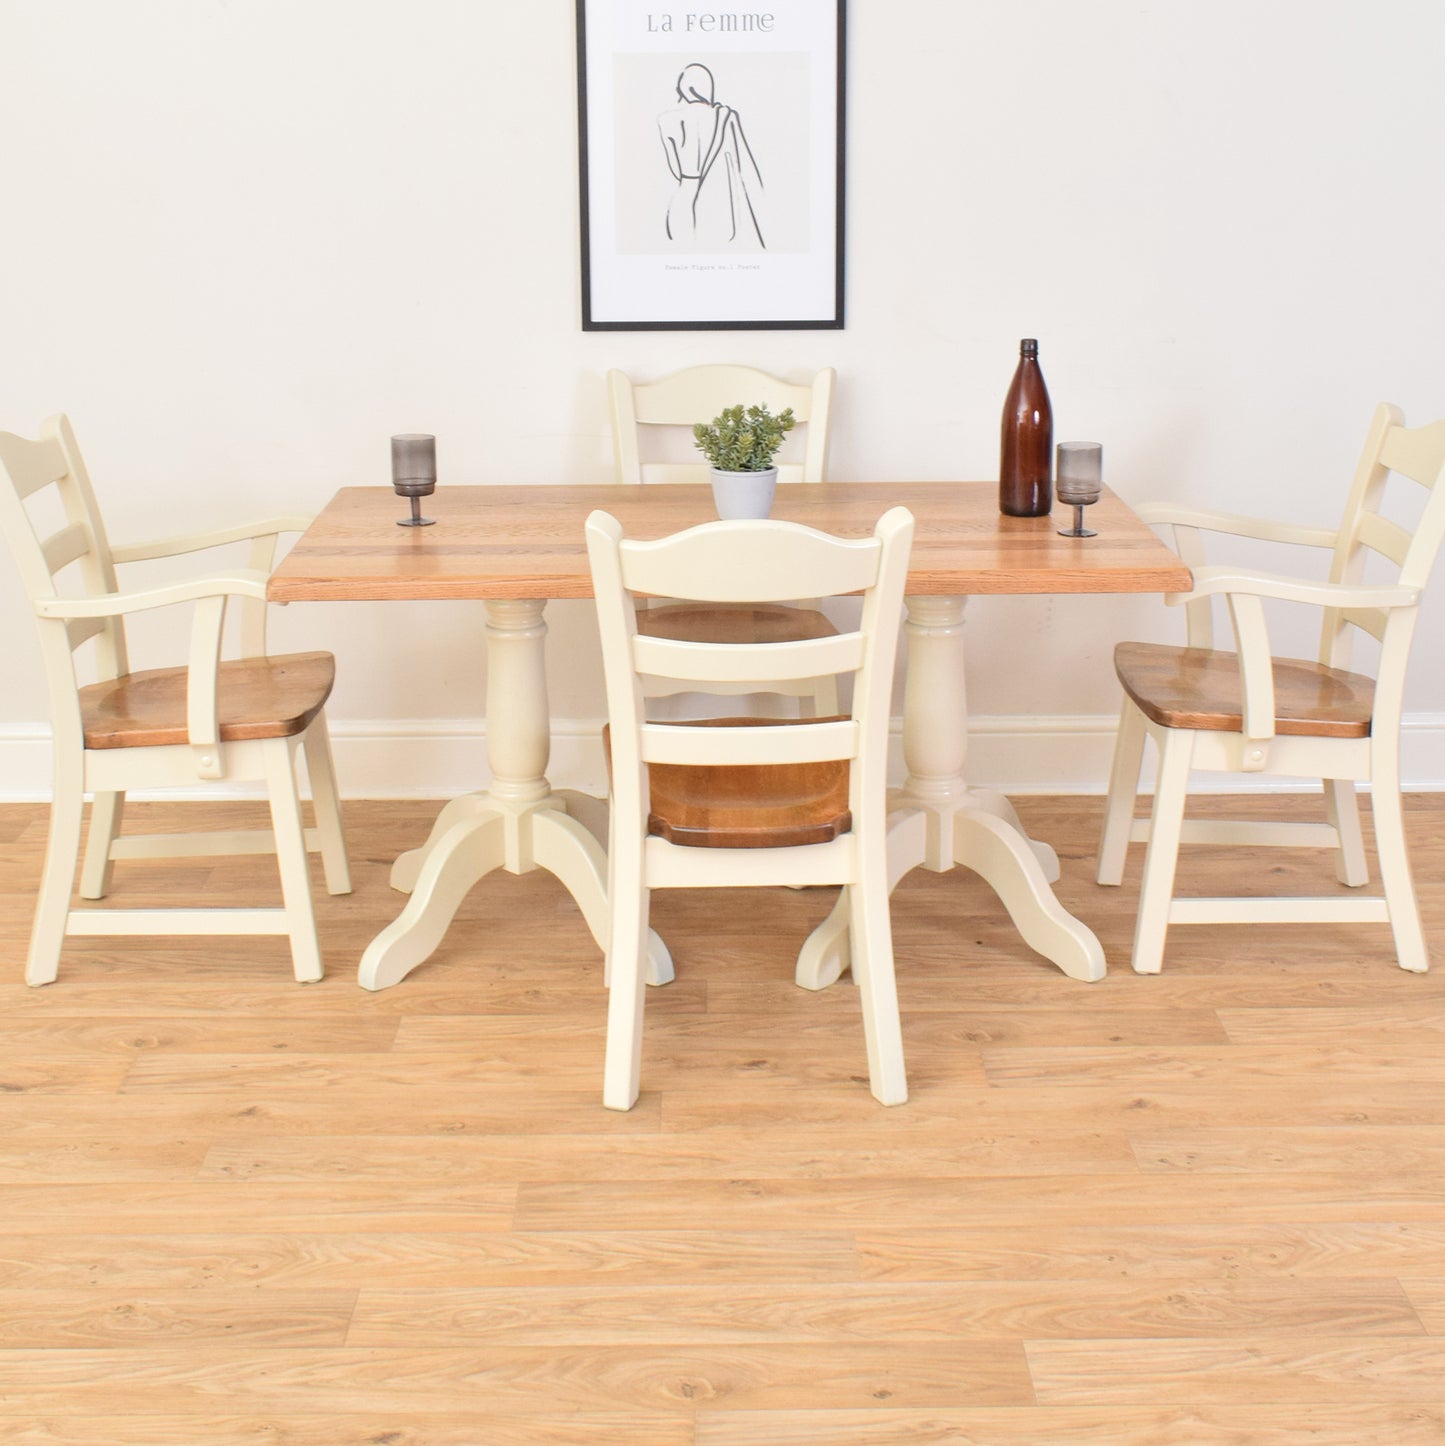 Dutch Oak Table And Four Chairs